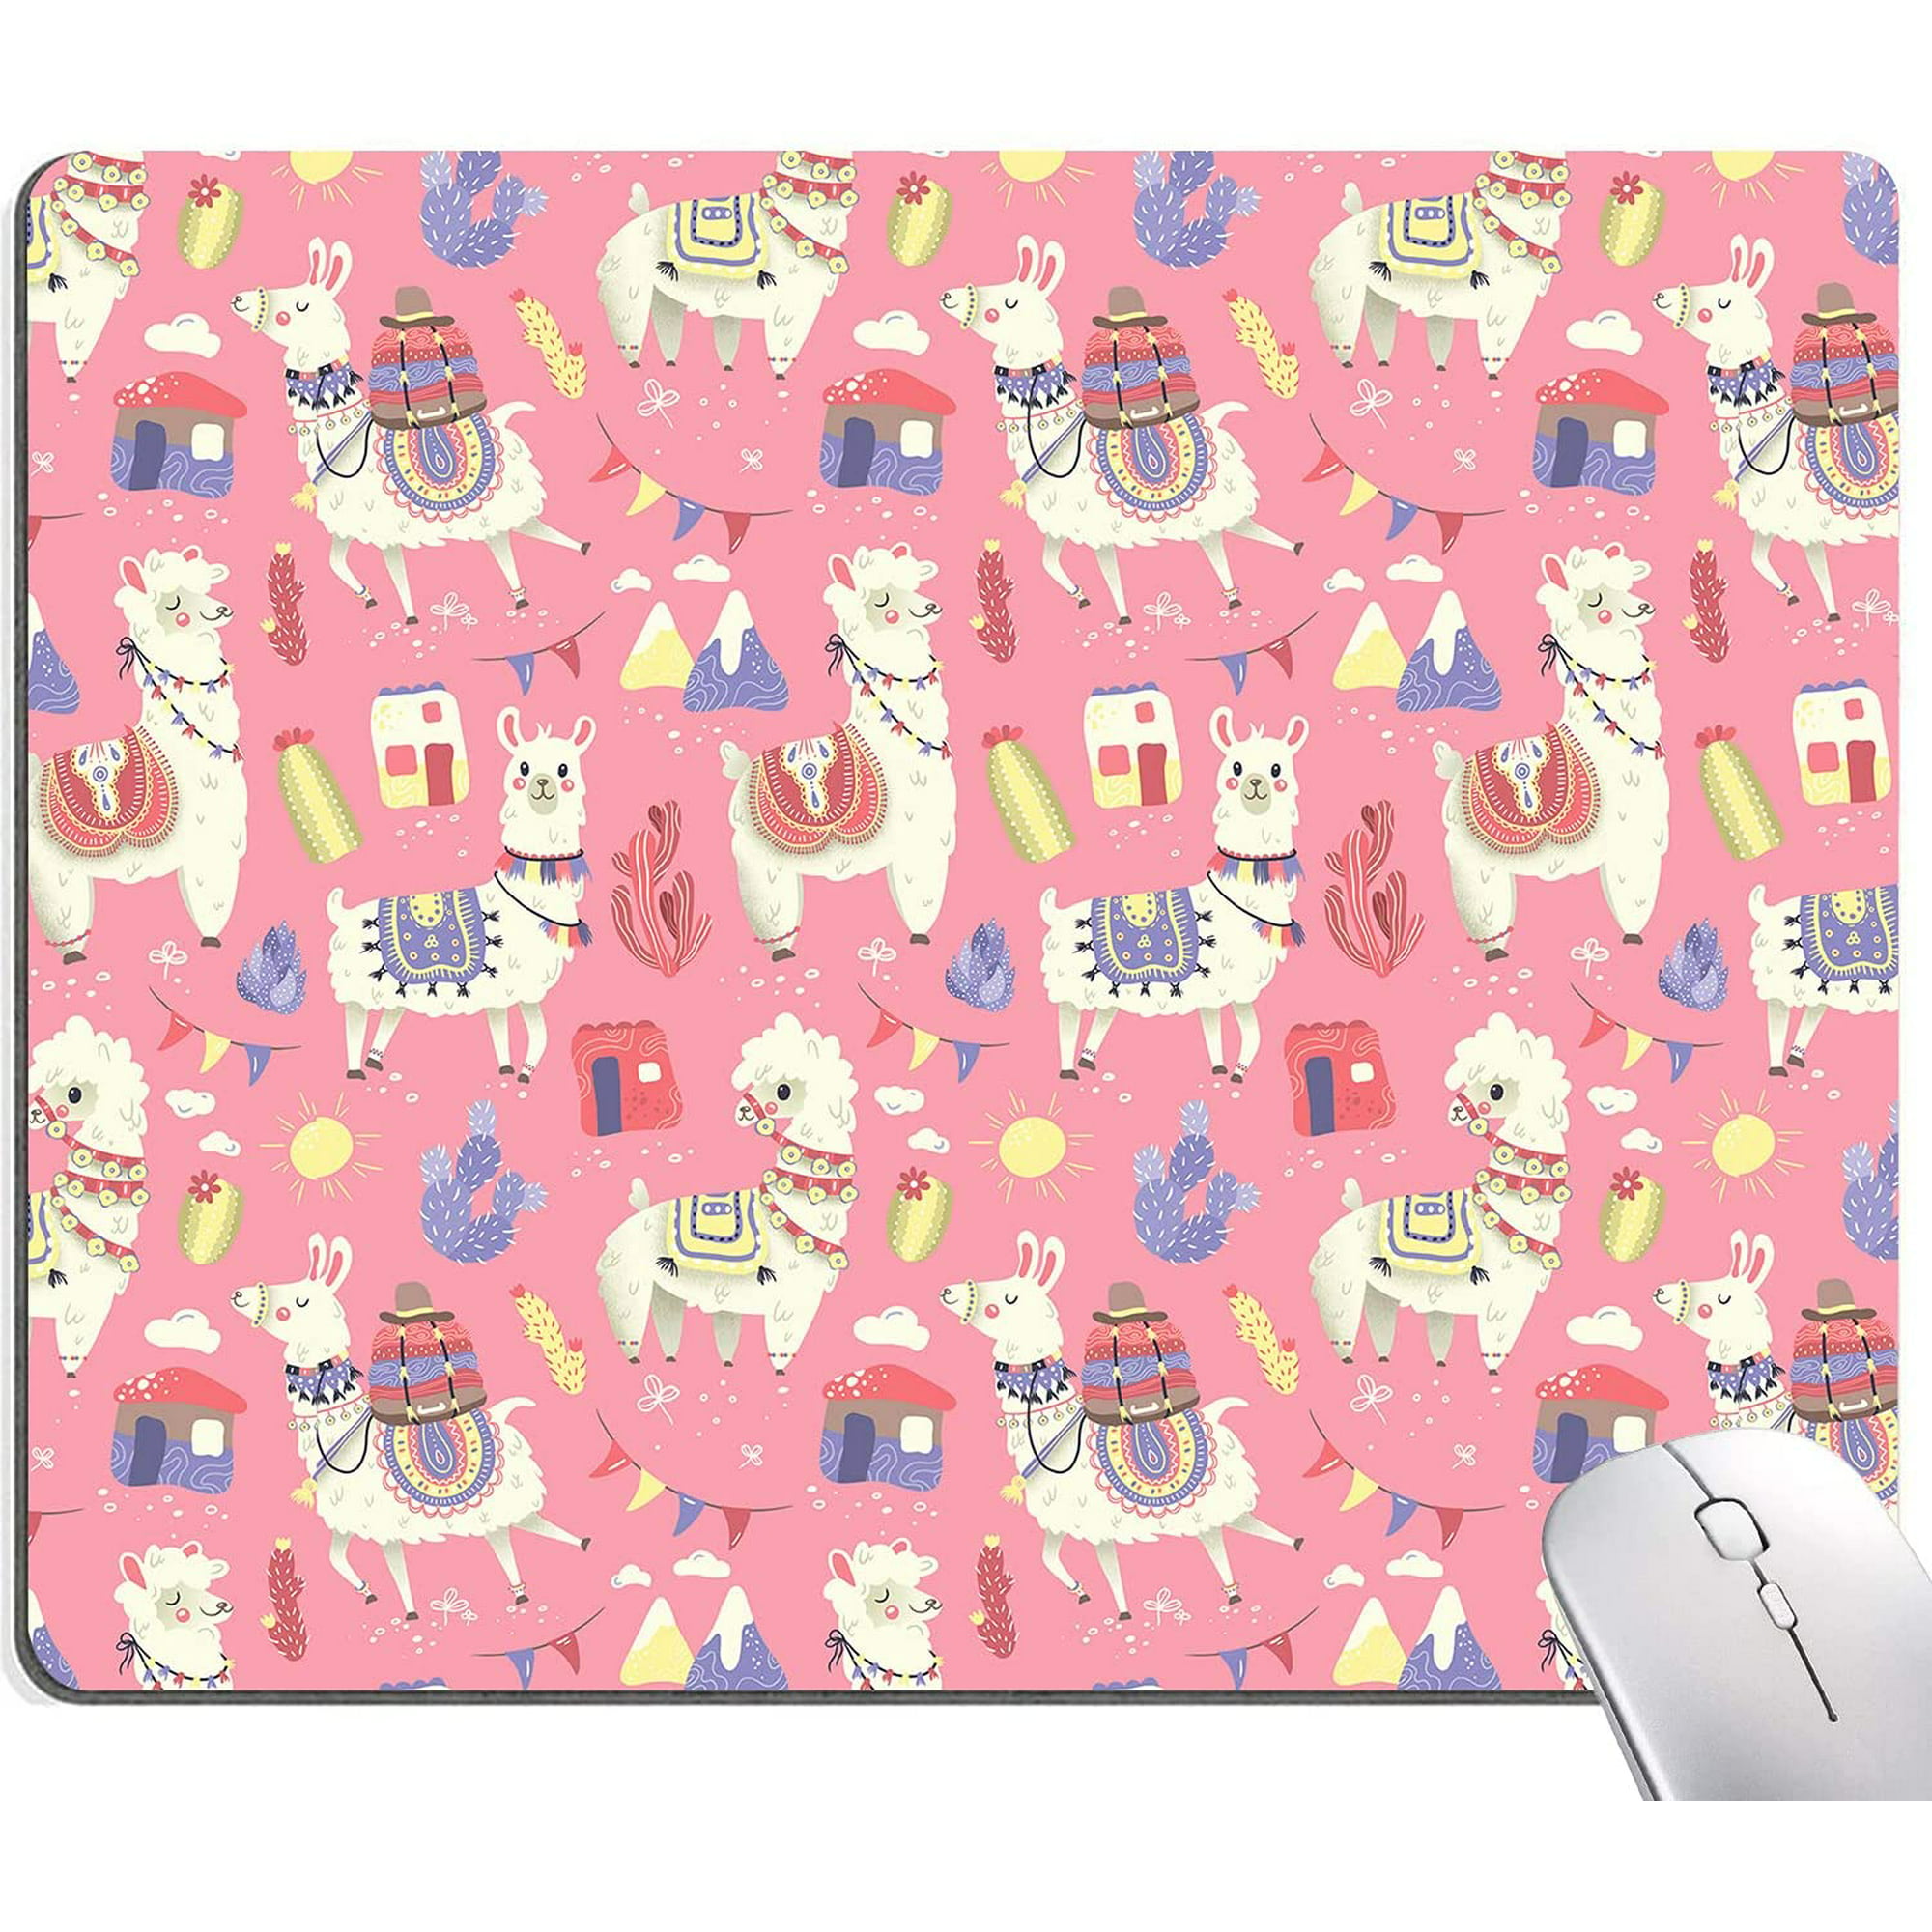 Cute Llama Mouse Pad, Animal Alpaca with Cactus Mouse Pad, Square  Waterproof Mouse Pad Non-Slip Rubber Base MousePads for Office Laptop,  